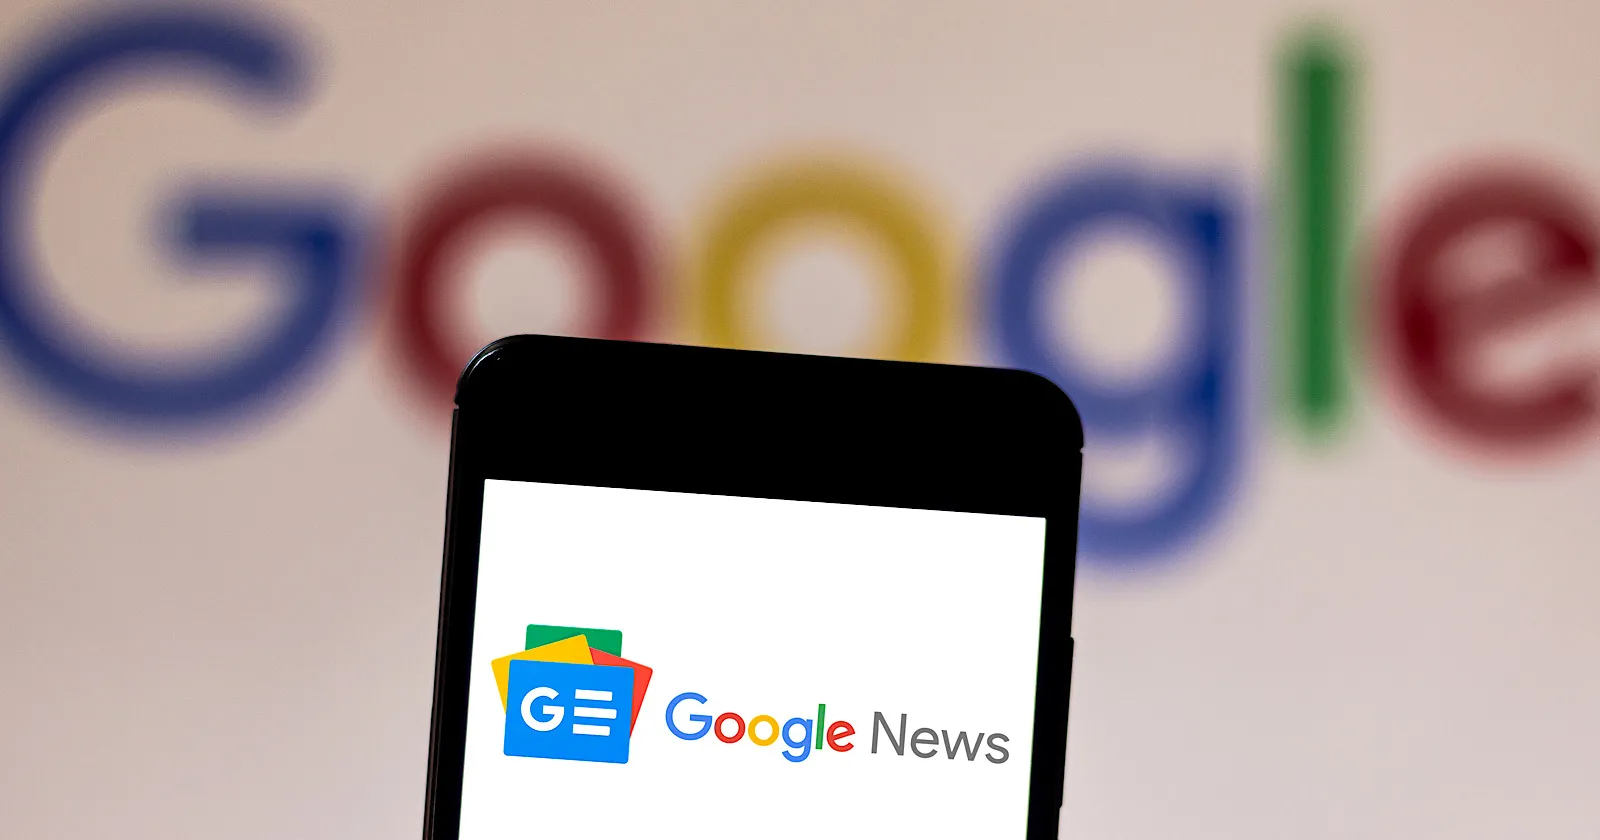 RIA Novosti: news aggregator Google News stopped opening from Russia